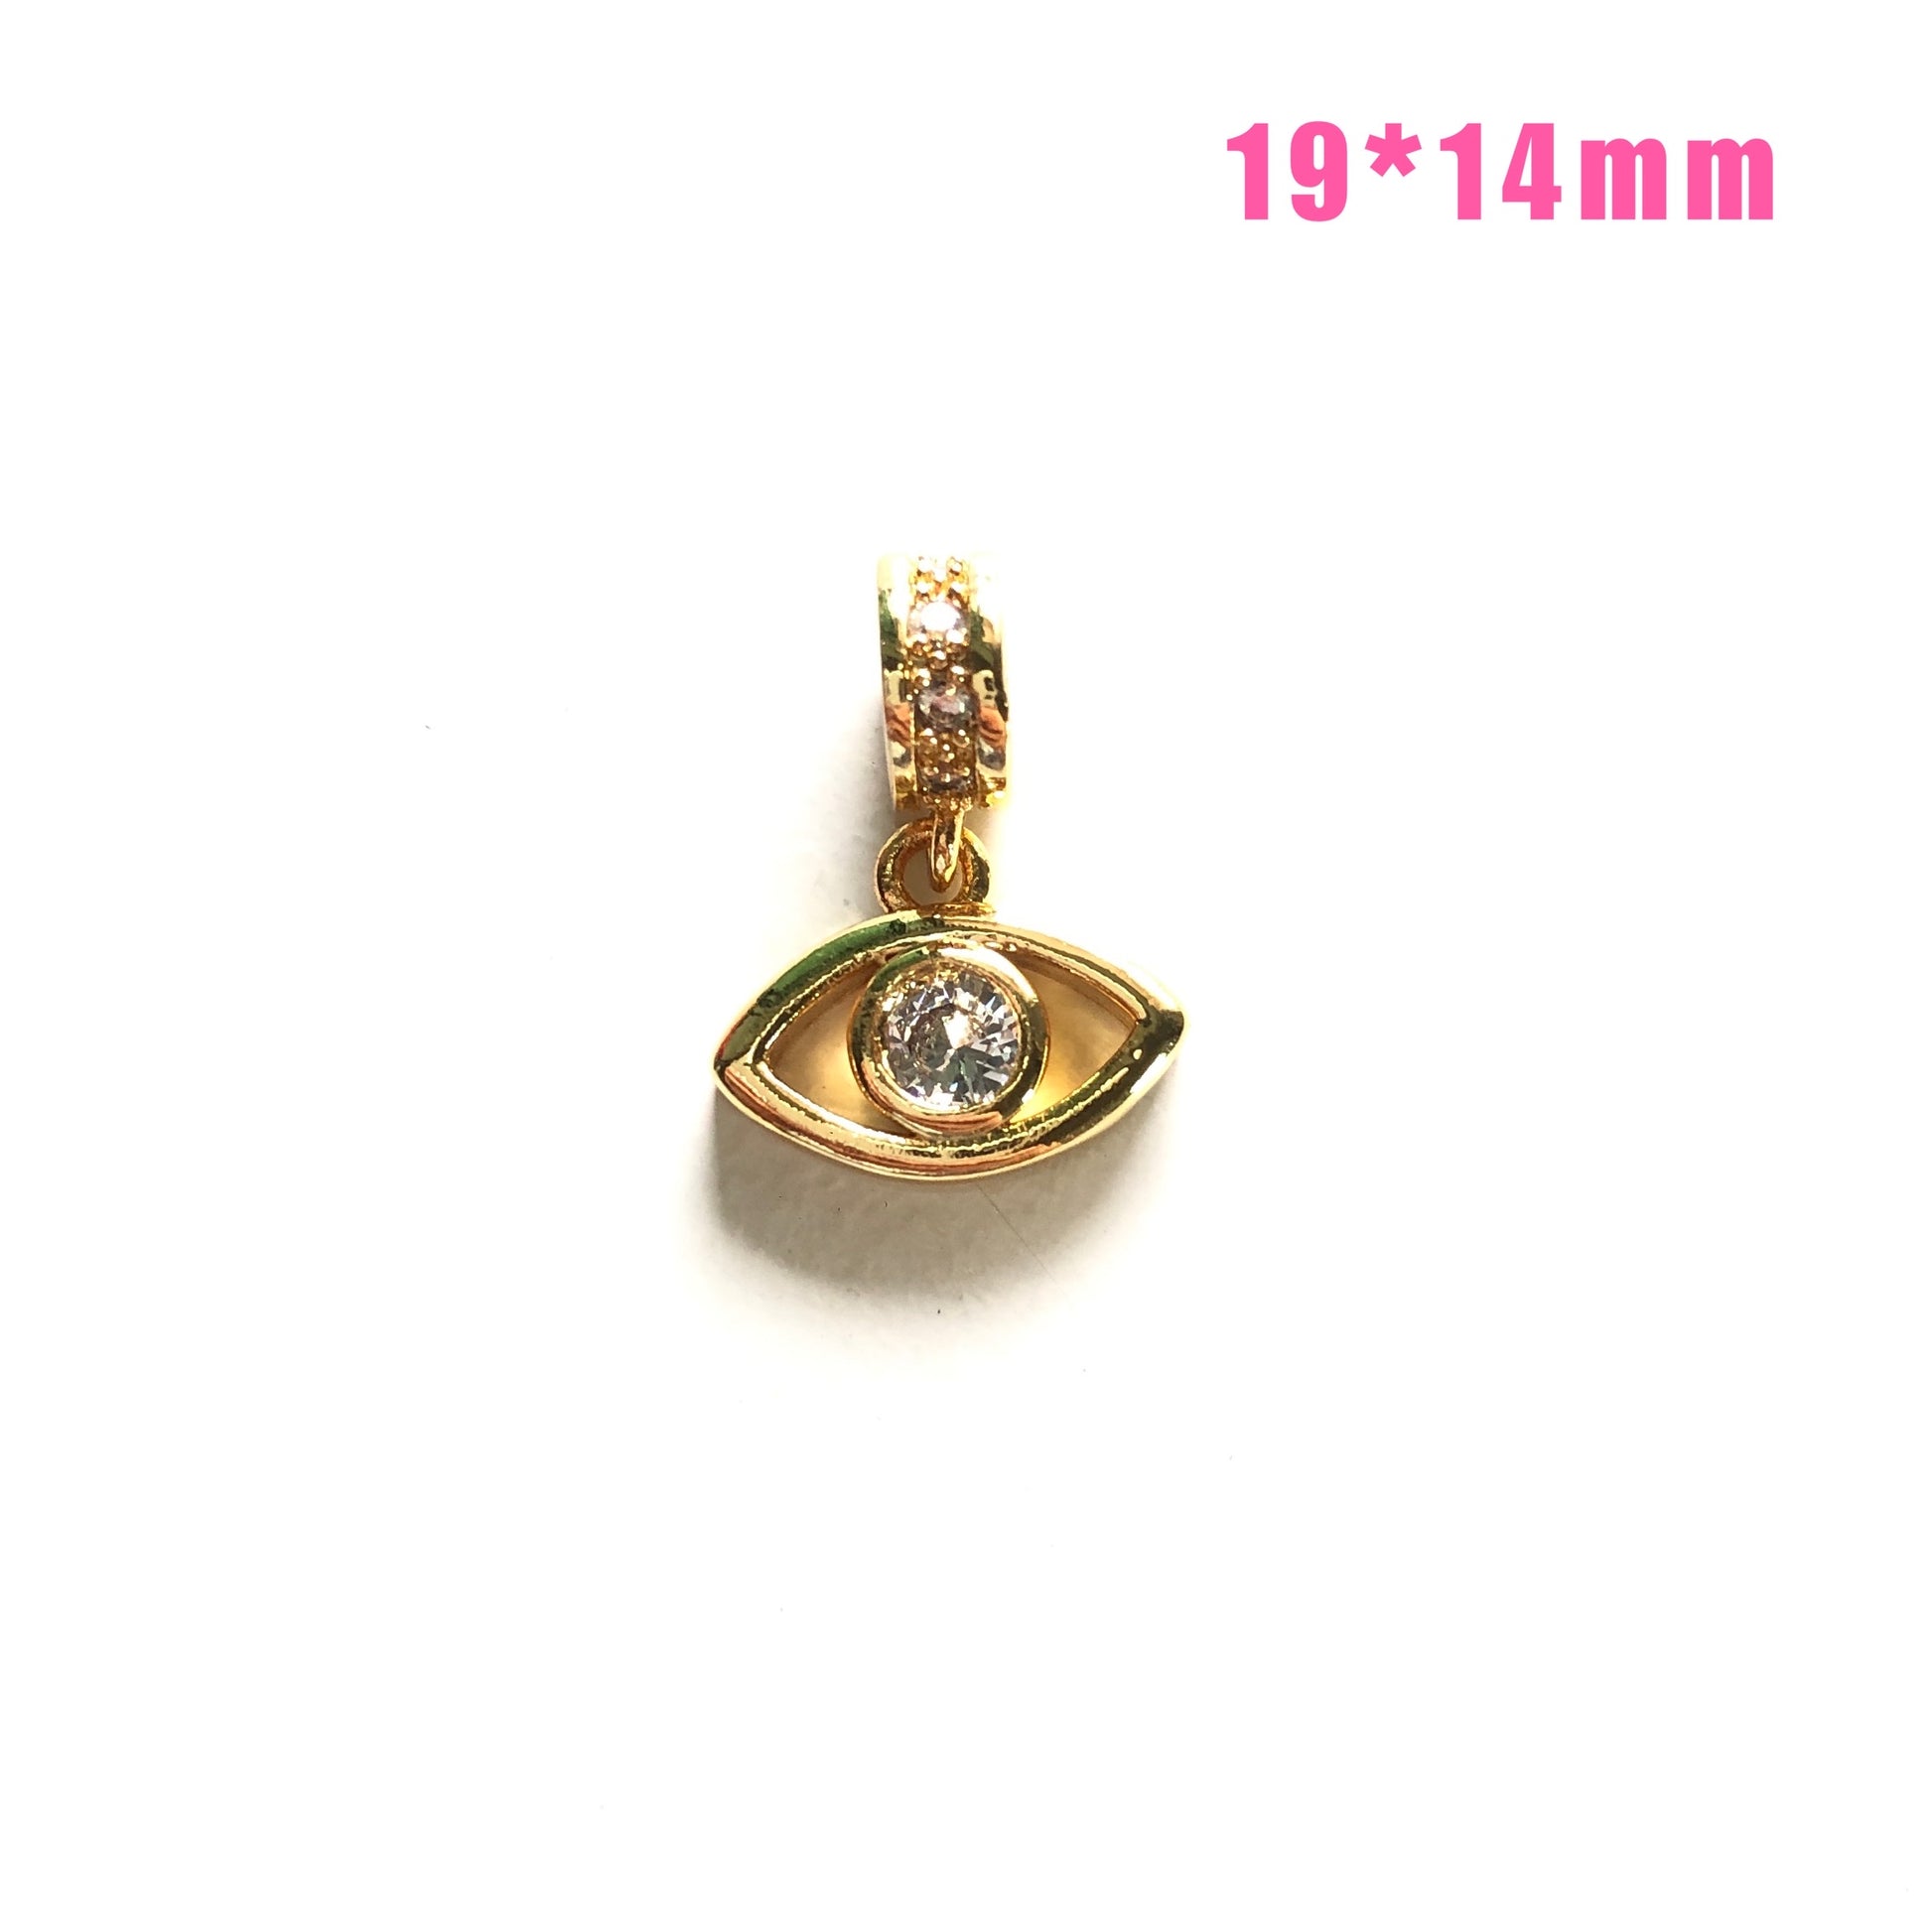 10pcs/lot Small Size CZ Paved Butterfly, Eye, Heart, Cross, Star, Moon Charms Eye CZ Paved Charms Small Sizes Charms Beads Beyond